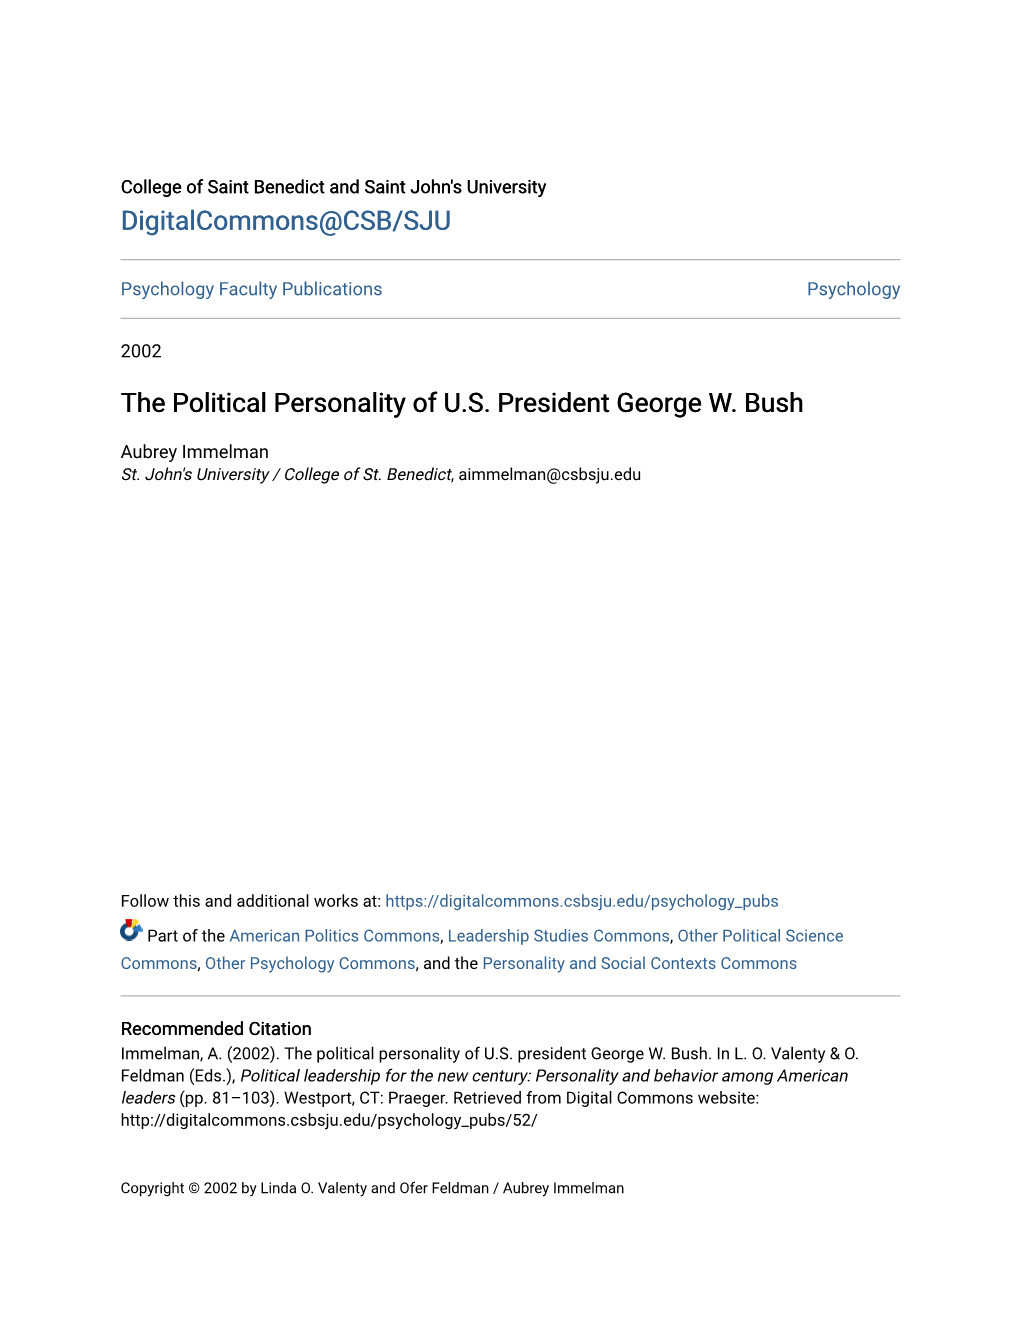 The Political Personality of U.S. President George W. Bush